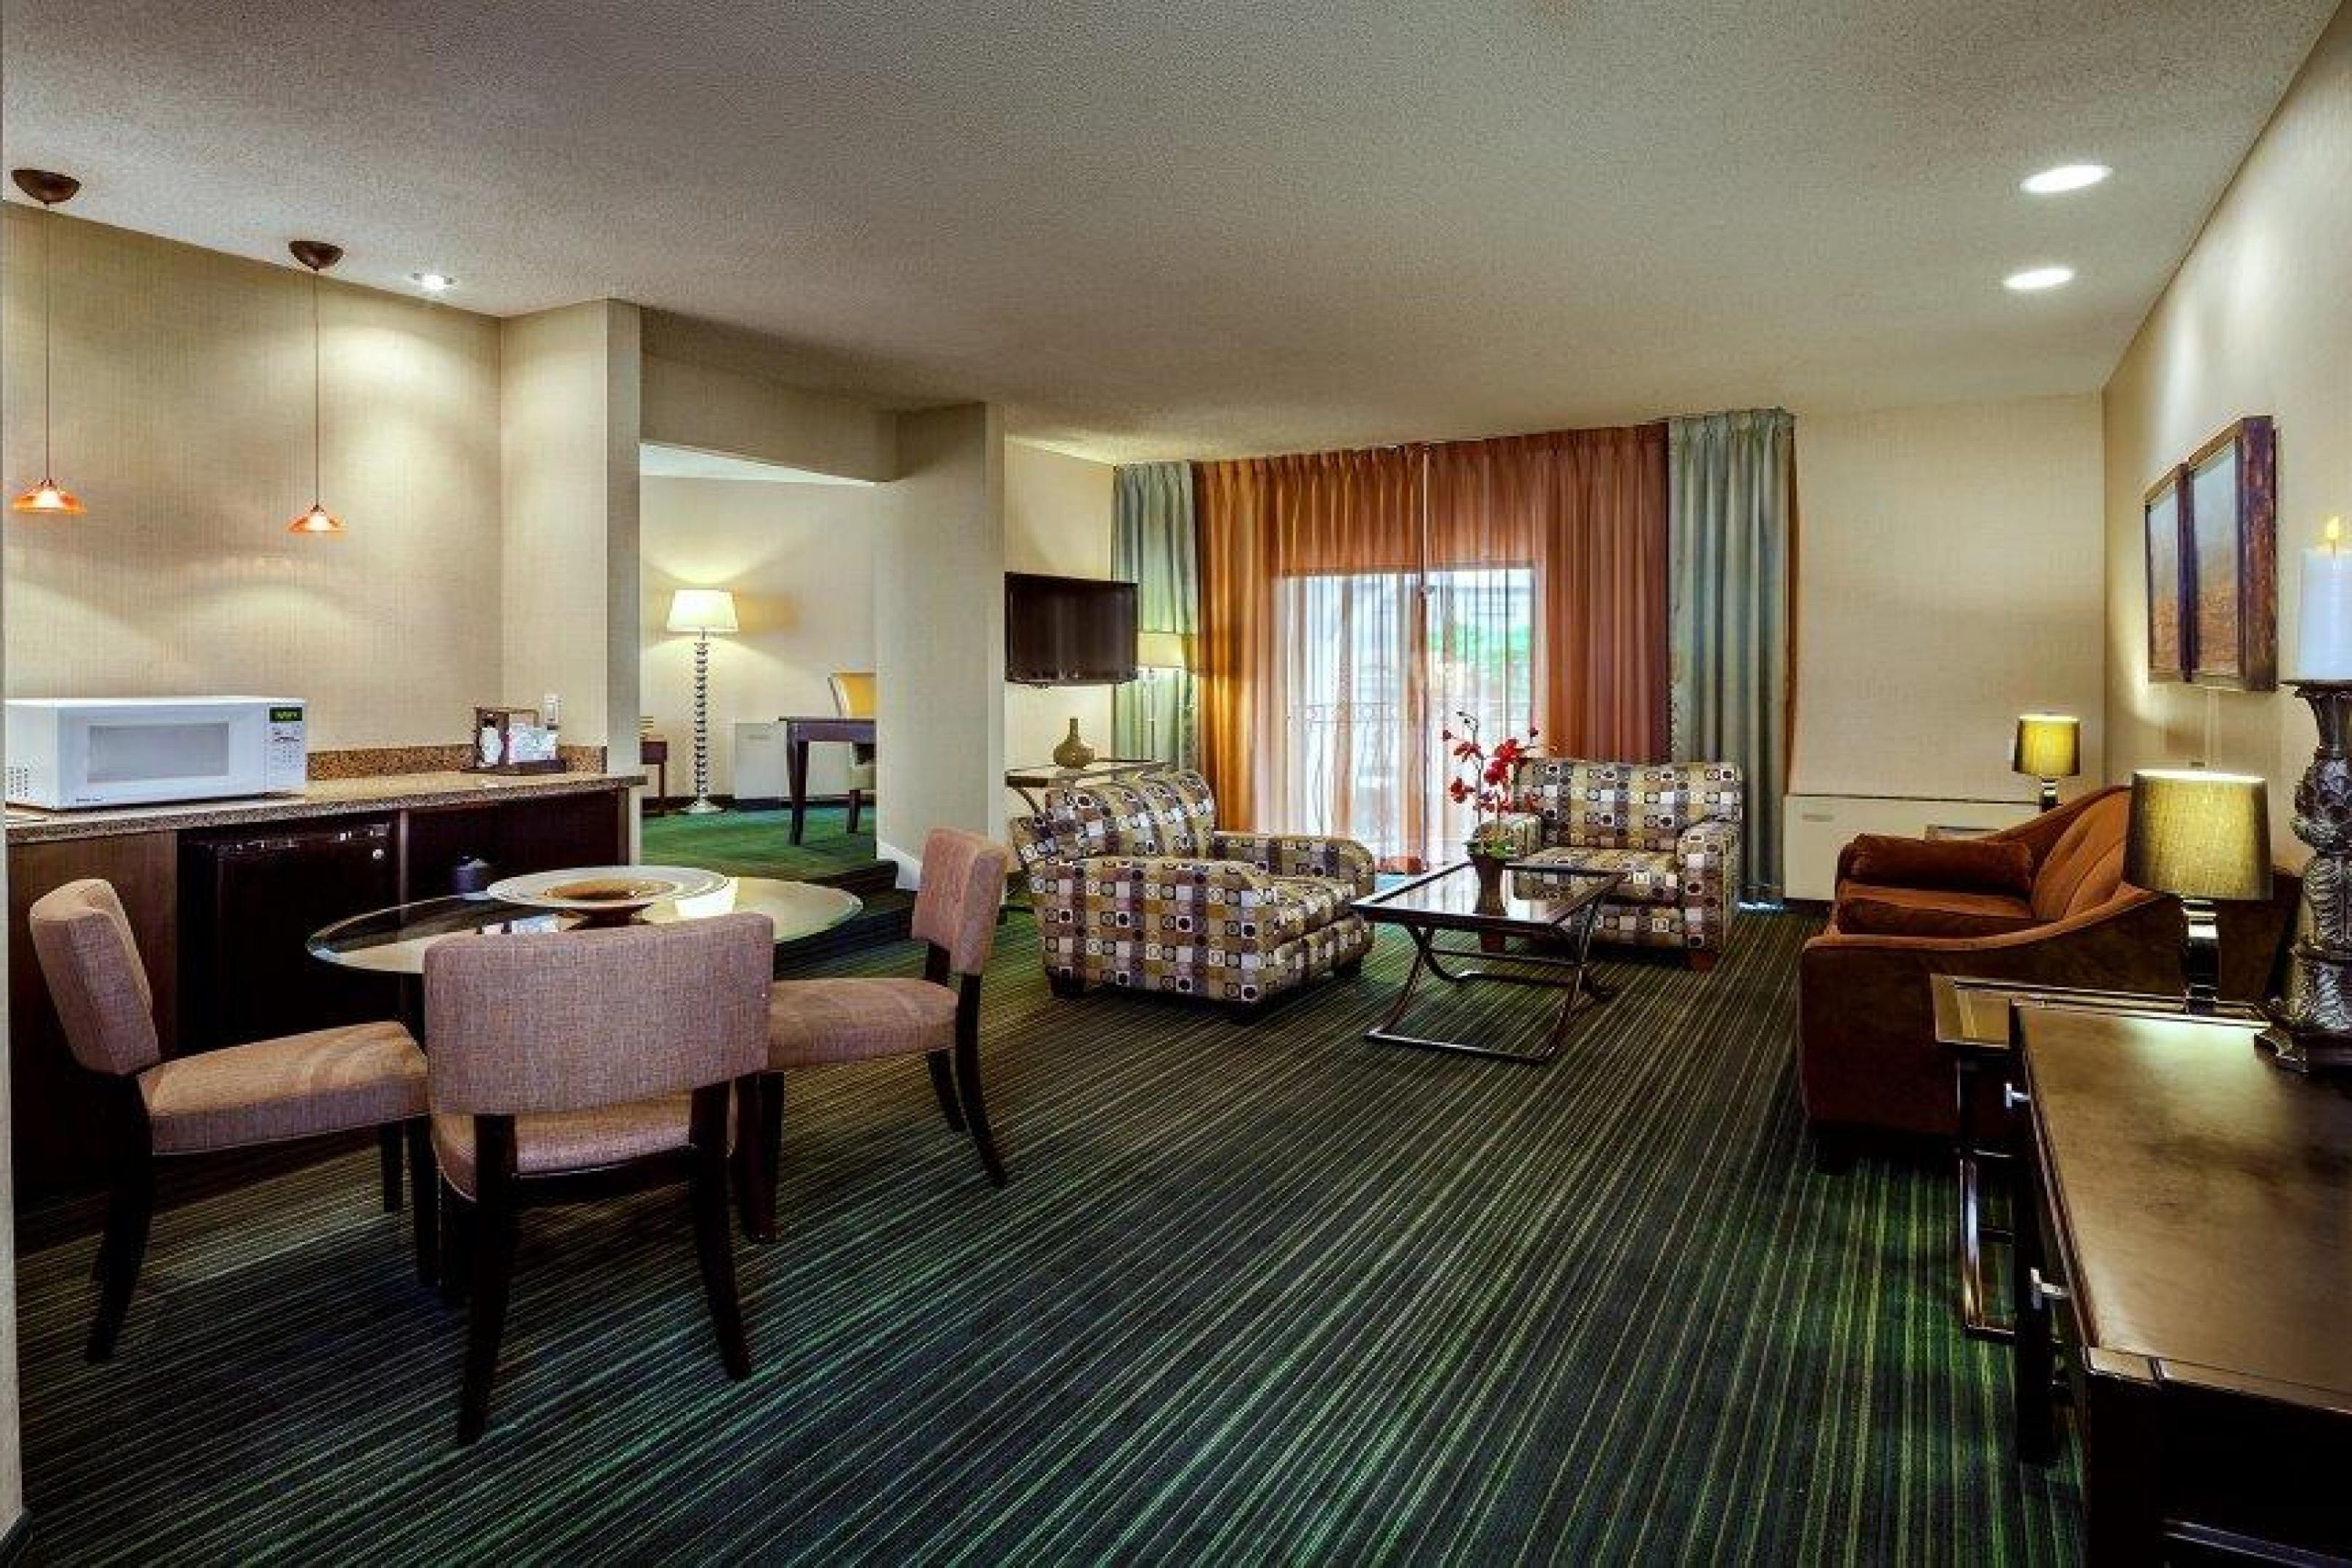 Stay in our upscale and elegant Presidential Suite